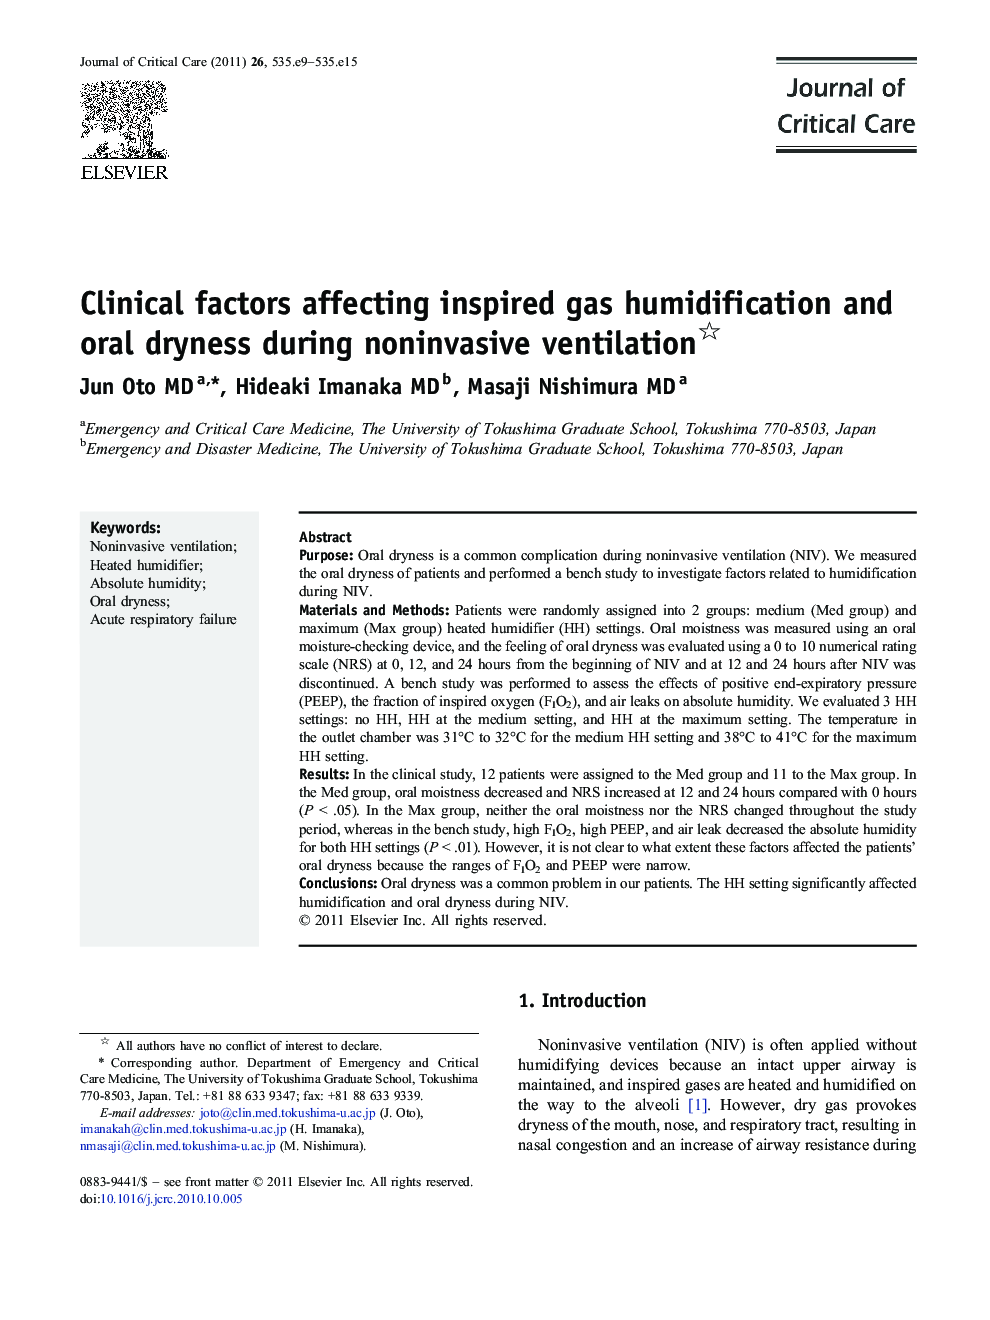 Clinical factors affecting inspired gas humidification and oral dryness during noninvasive ventilation